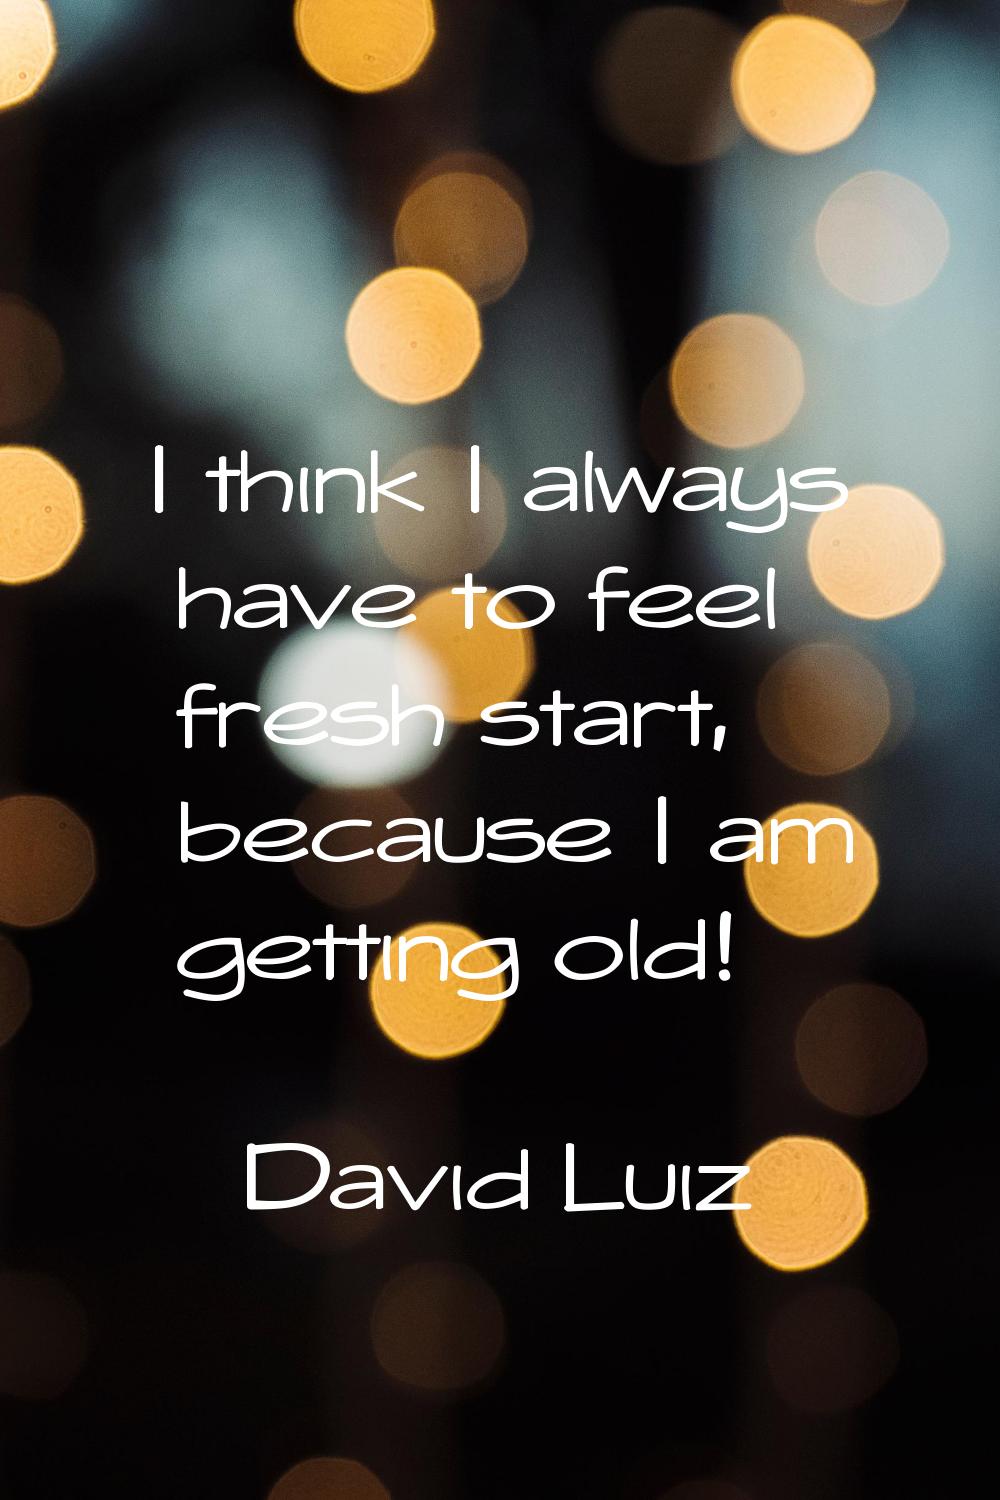 I think I always have to feel fresh start, because I am getting old!